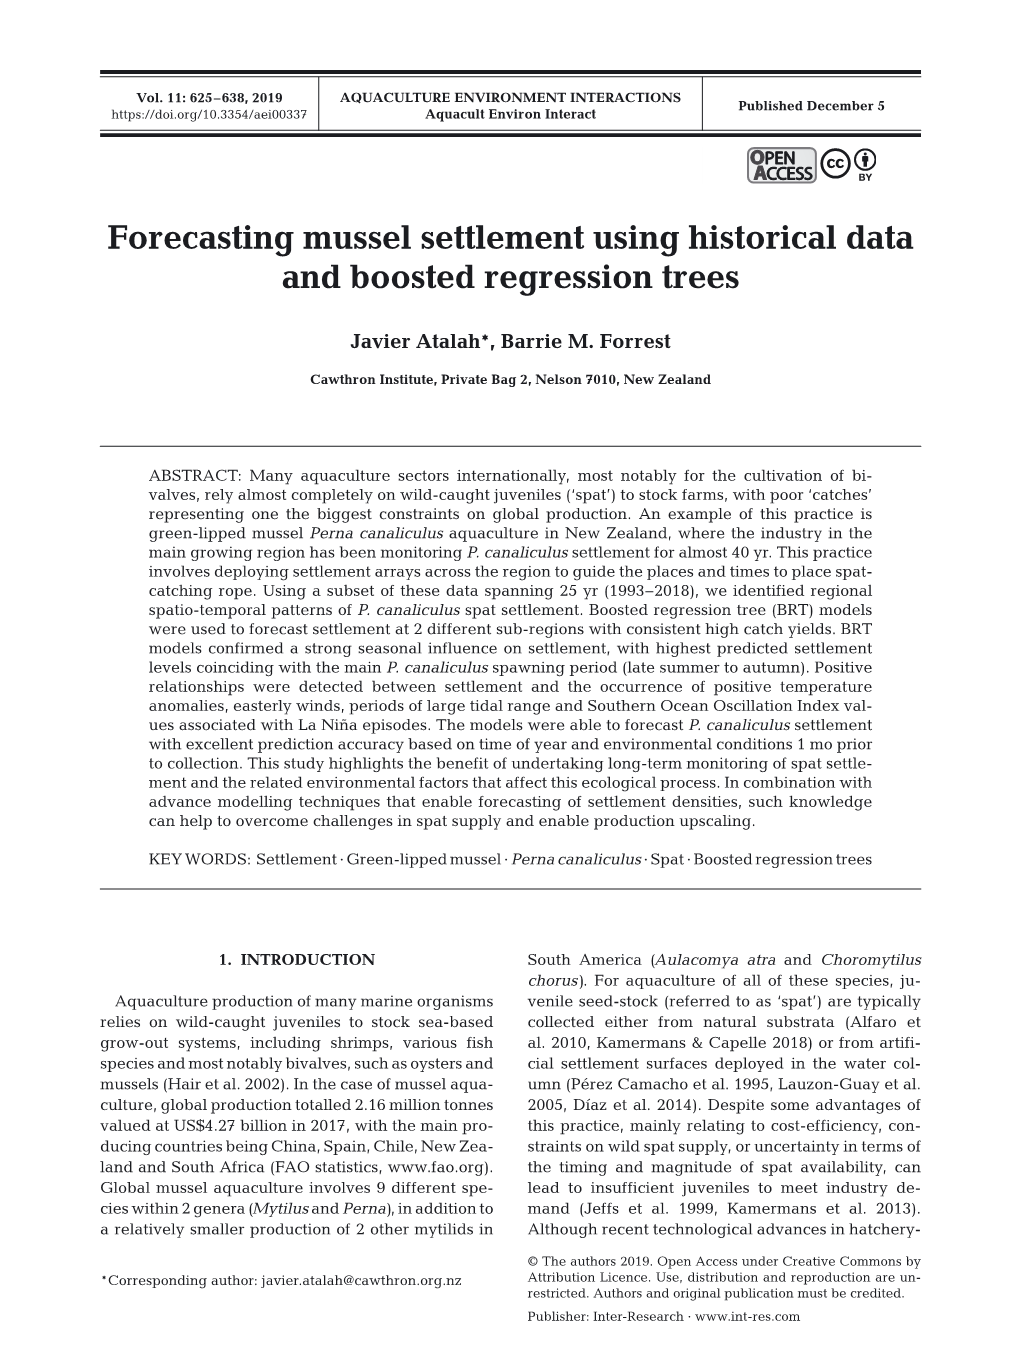 Forecasting Mussel Settlement Using Historical Data and Boosted Regression Trees